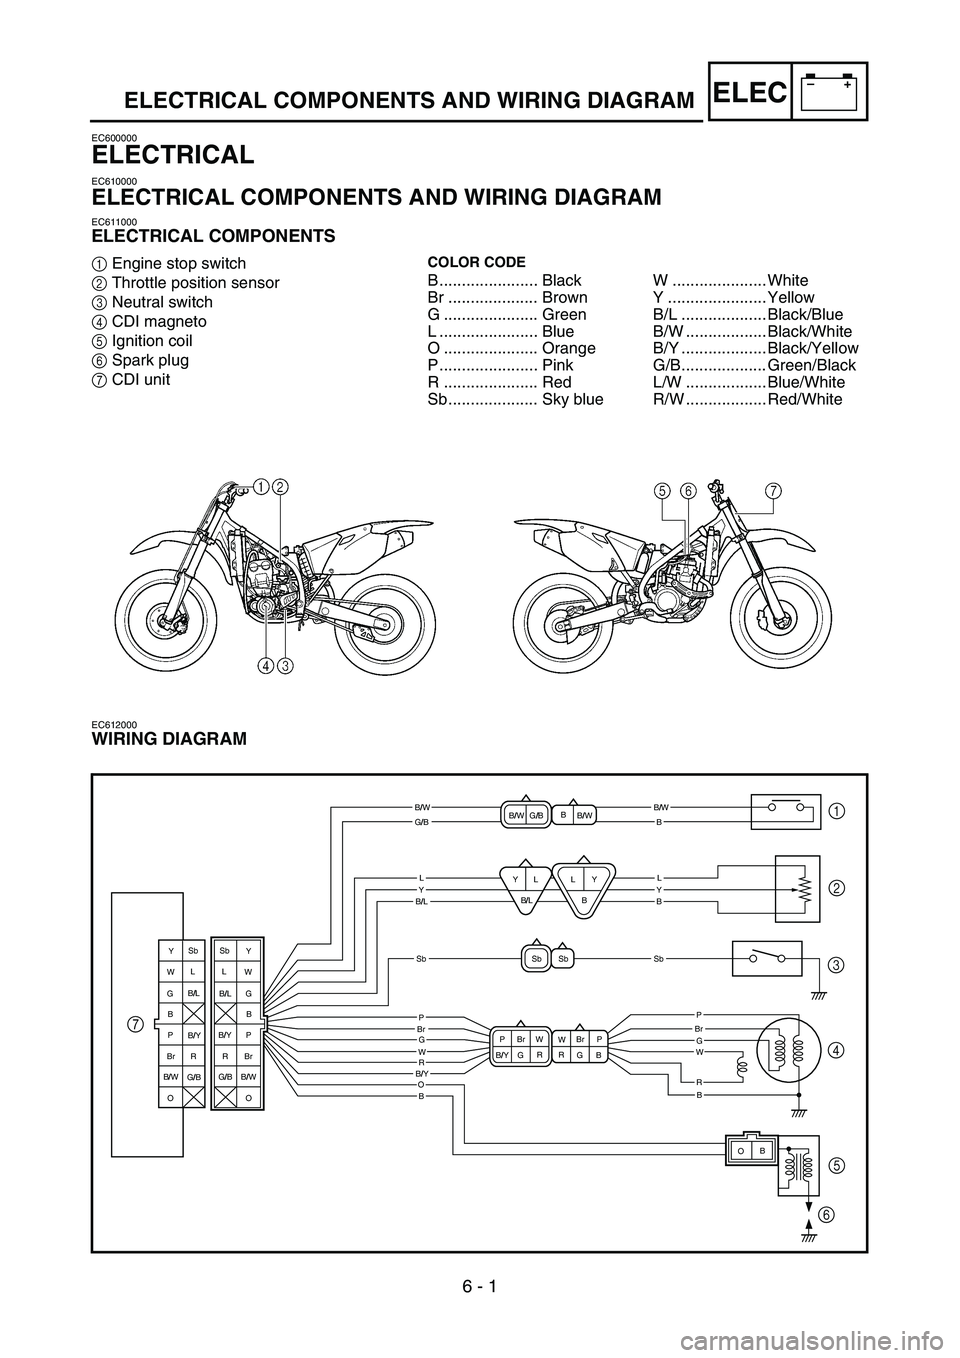 YAMAHA YZ250F 2006  Betriebsanleitungen (in German) 6 - 1
–+ELECELECTRICAL COMPONENTS AND WIRING DIAGRAM
EC600000
ELECTRICAL
EC610000
ELECTRICAL COMPONENTS AND WIRING DIAGRAM
EC611000
ELECTRICAL COMPONENTS
1Engine stop switch
2Throttle position senso